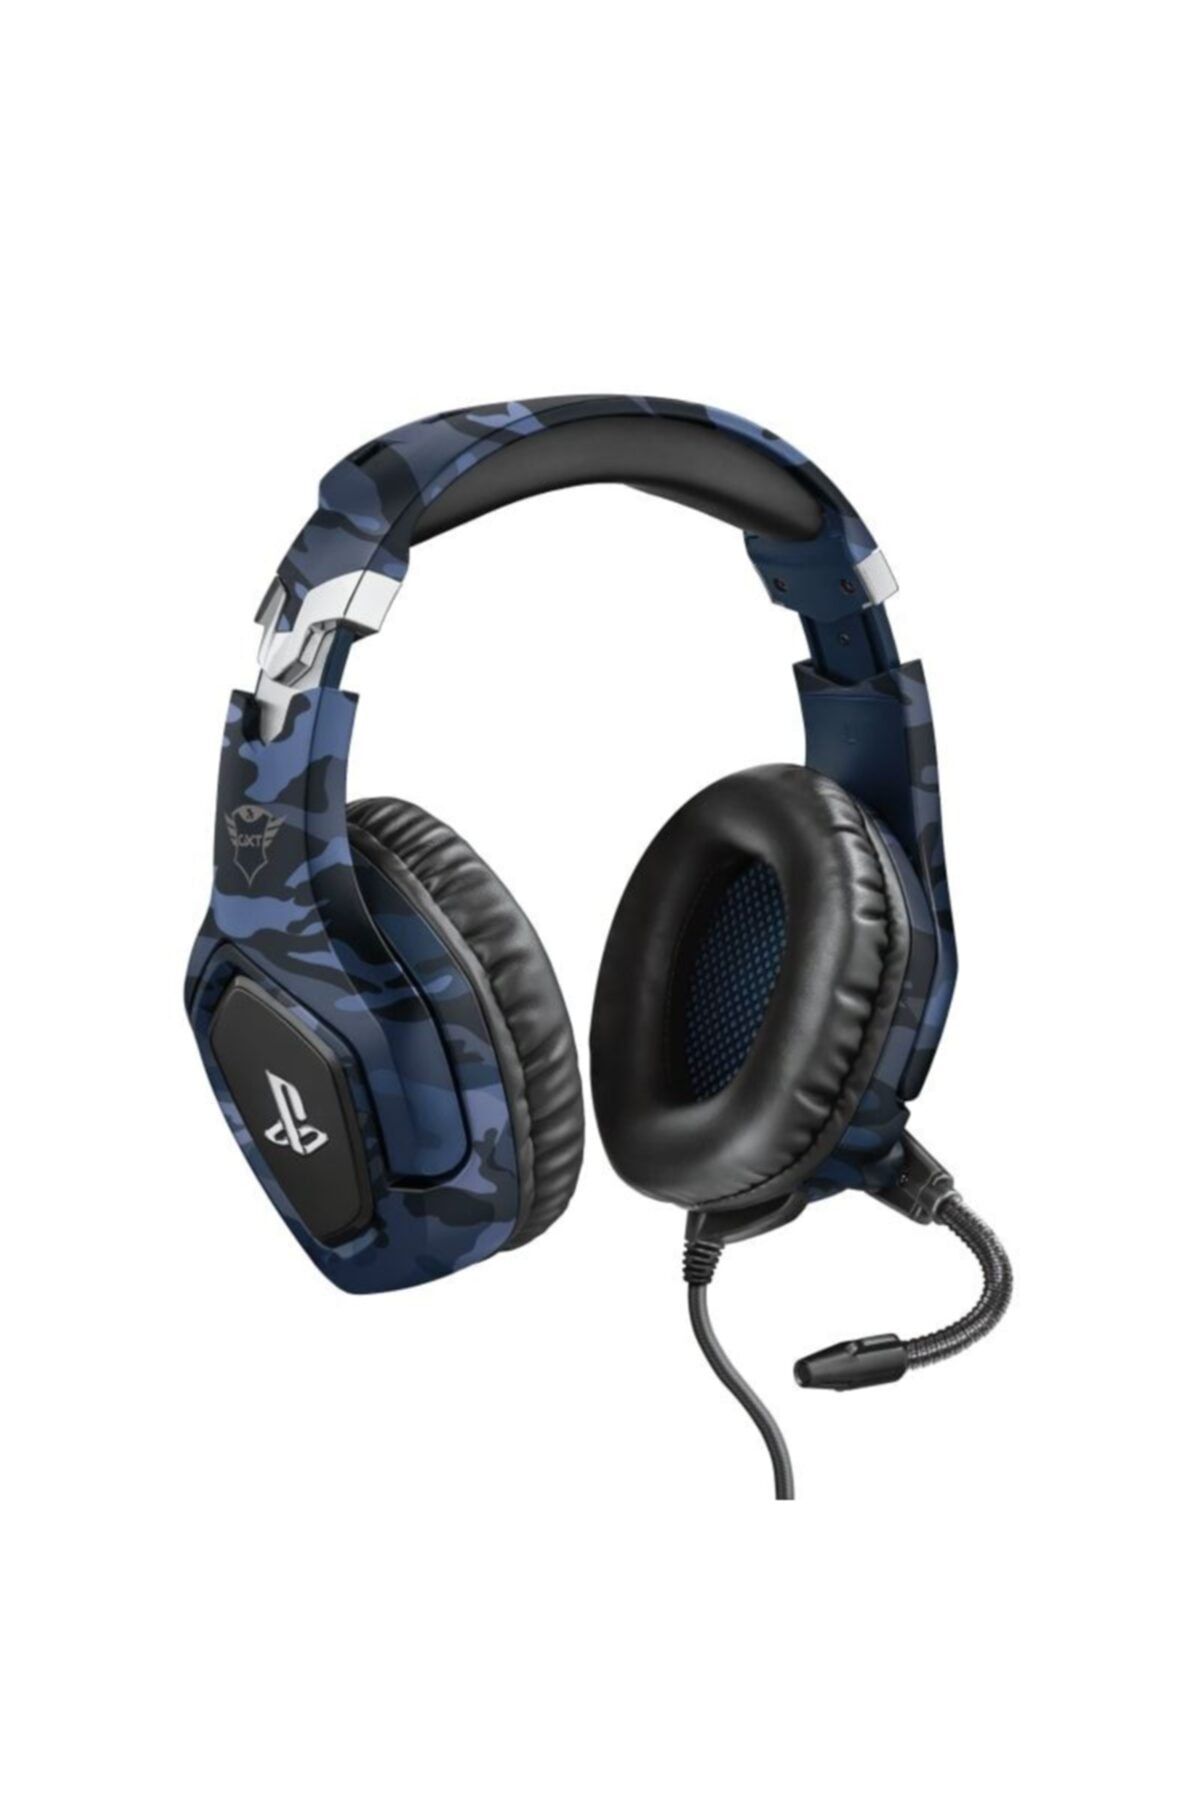 Trust 23532 Gxt488 Forze-b Ps4 Gaming Headset Ps